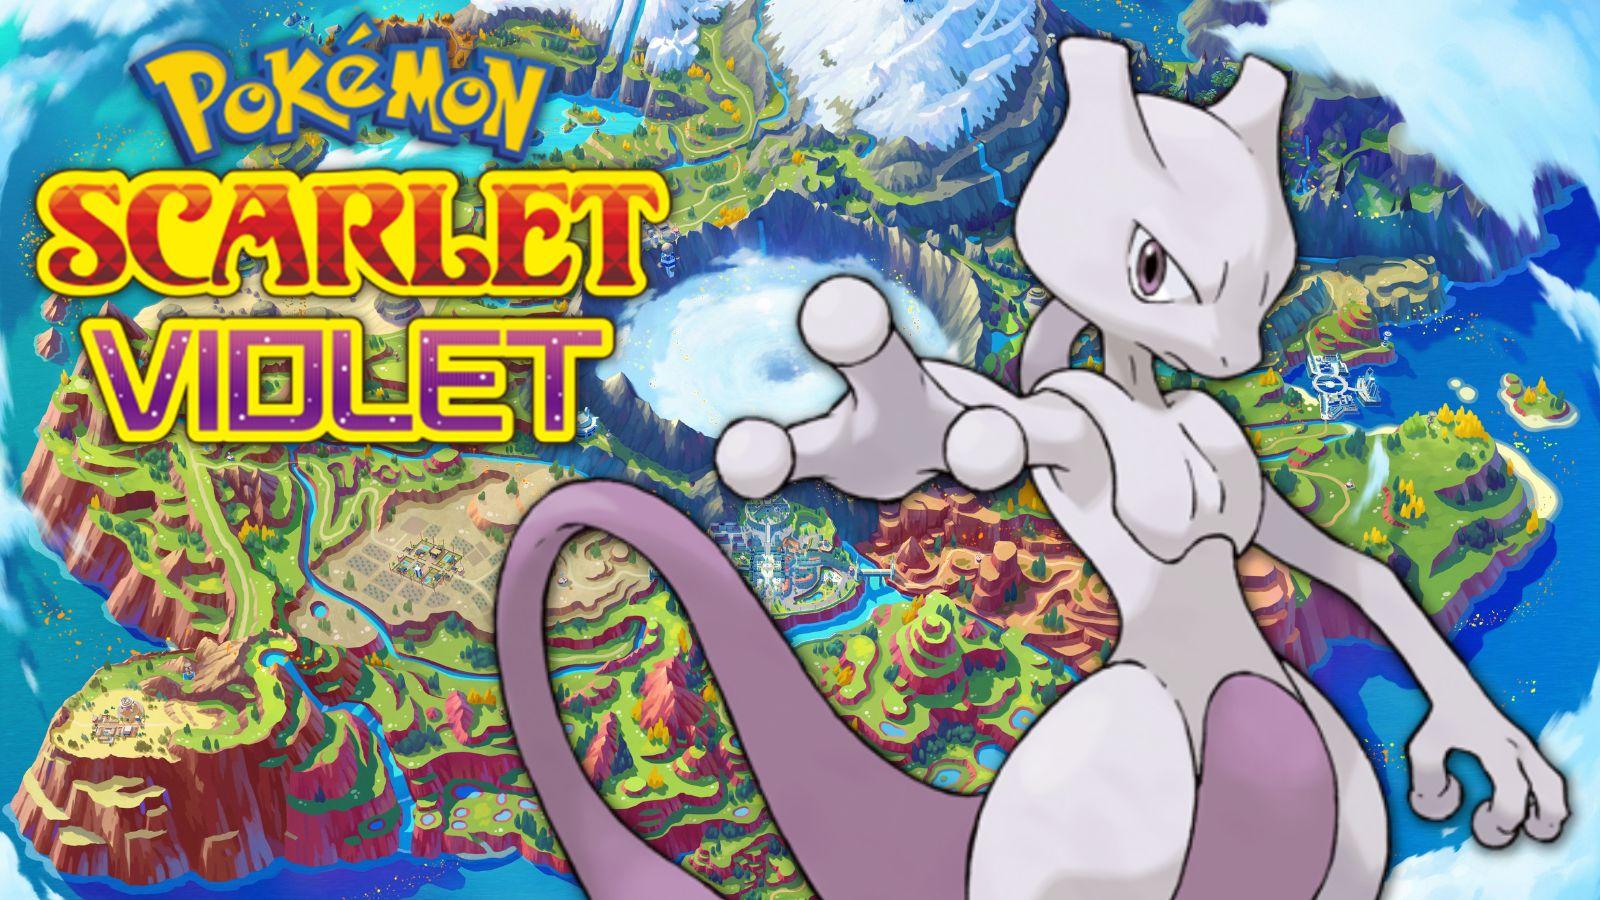 Easiest way to beat Mewtwo in the Pokémon Scarlet and Violet